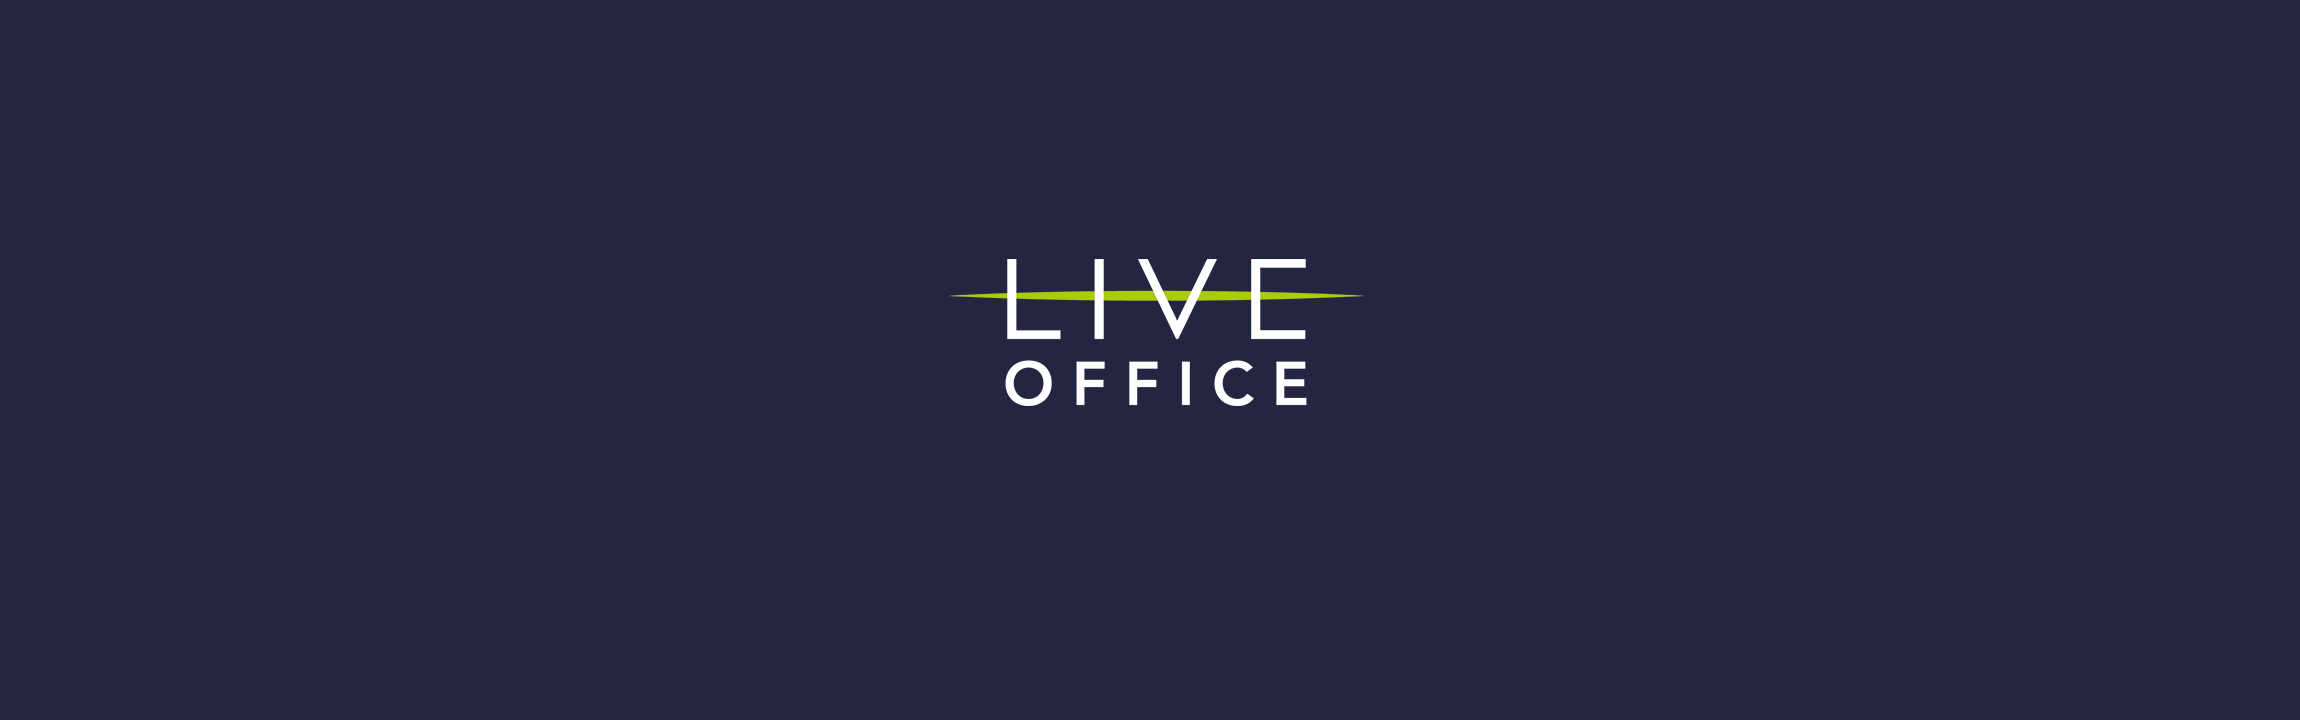 LIVE OFFICE